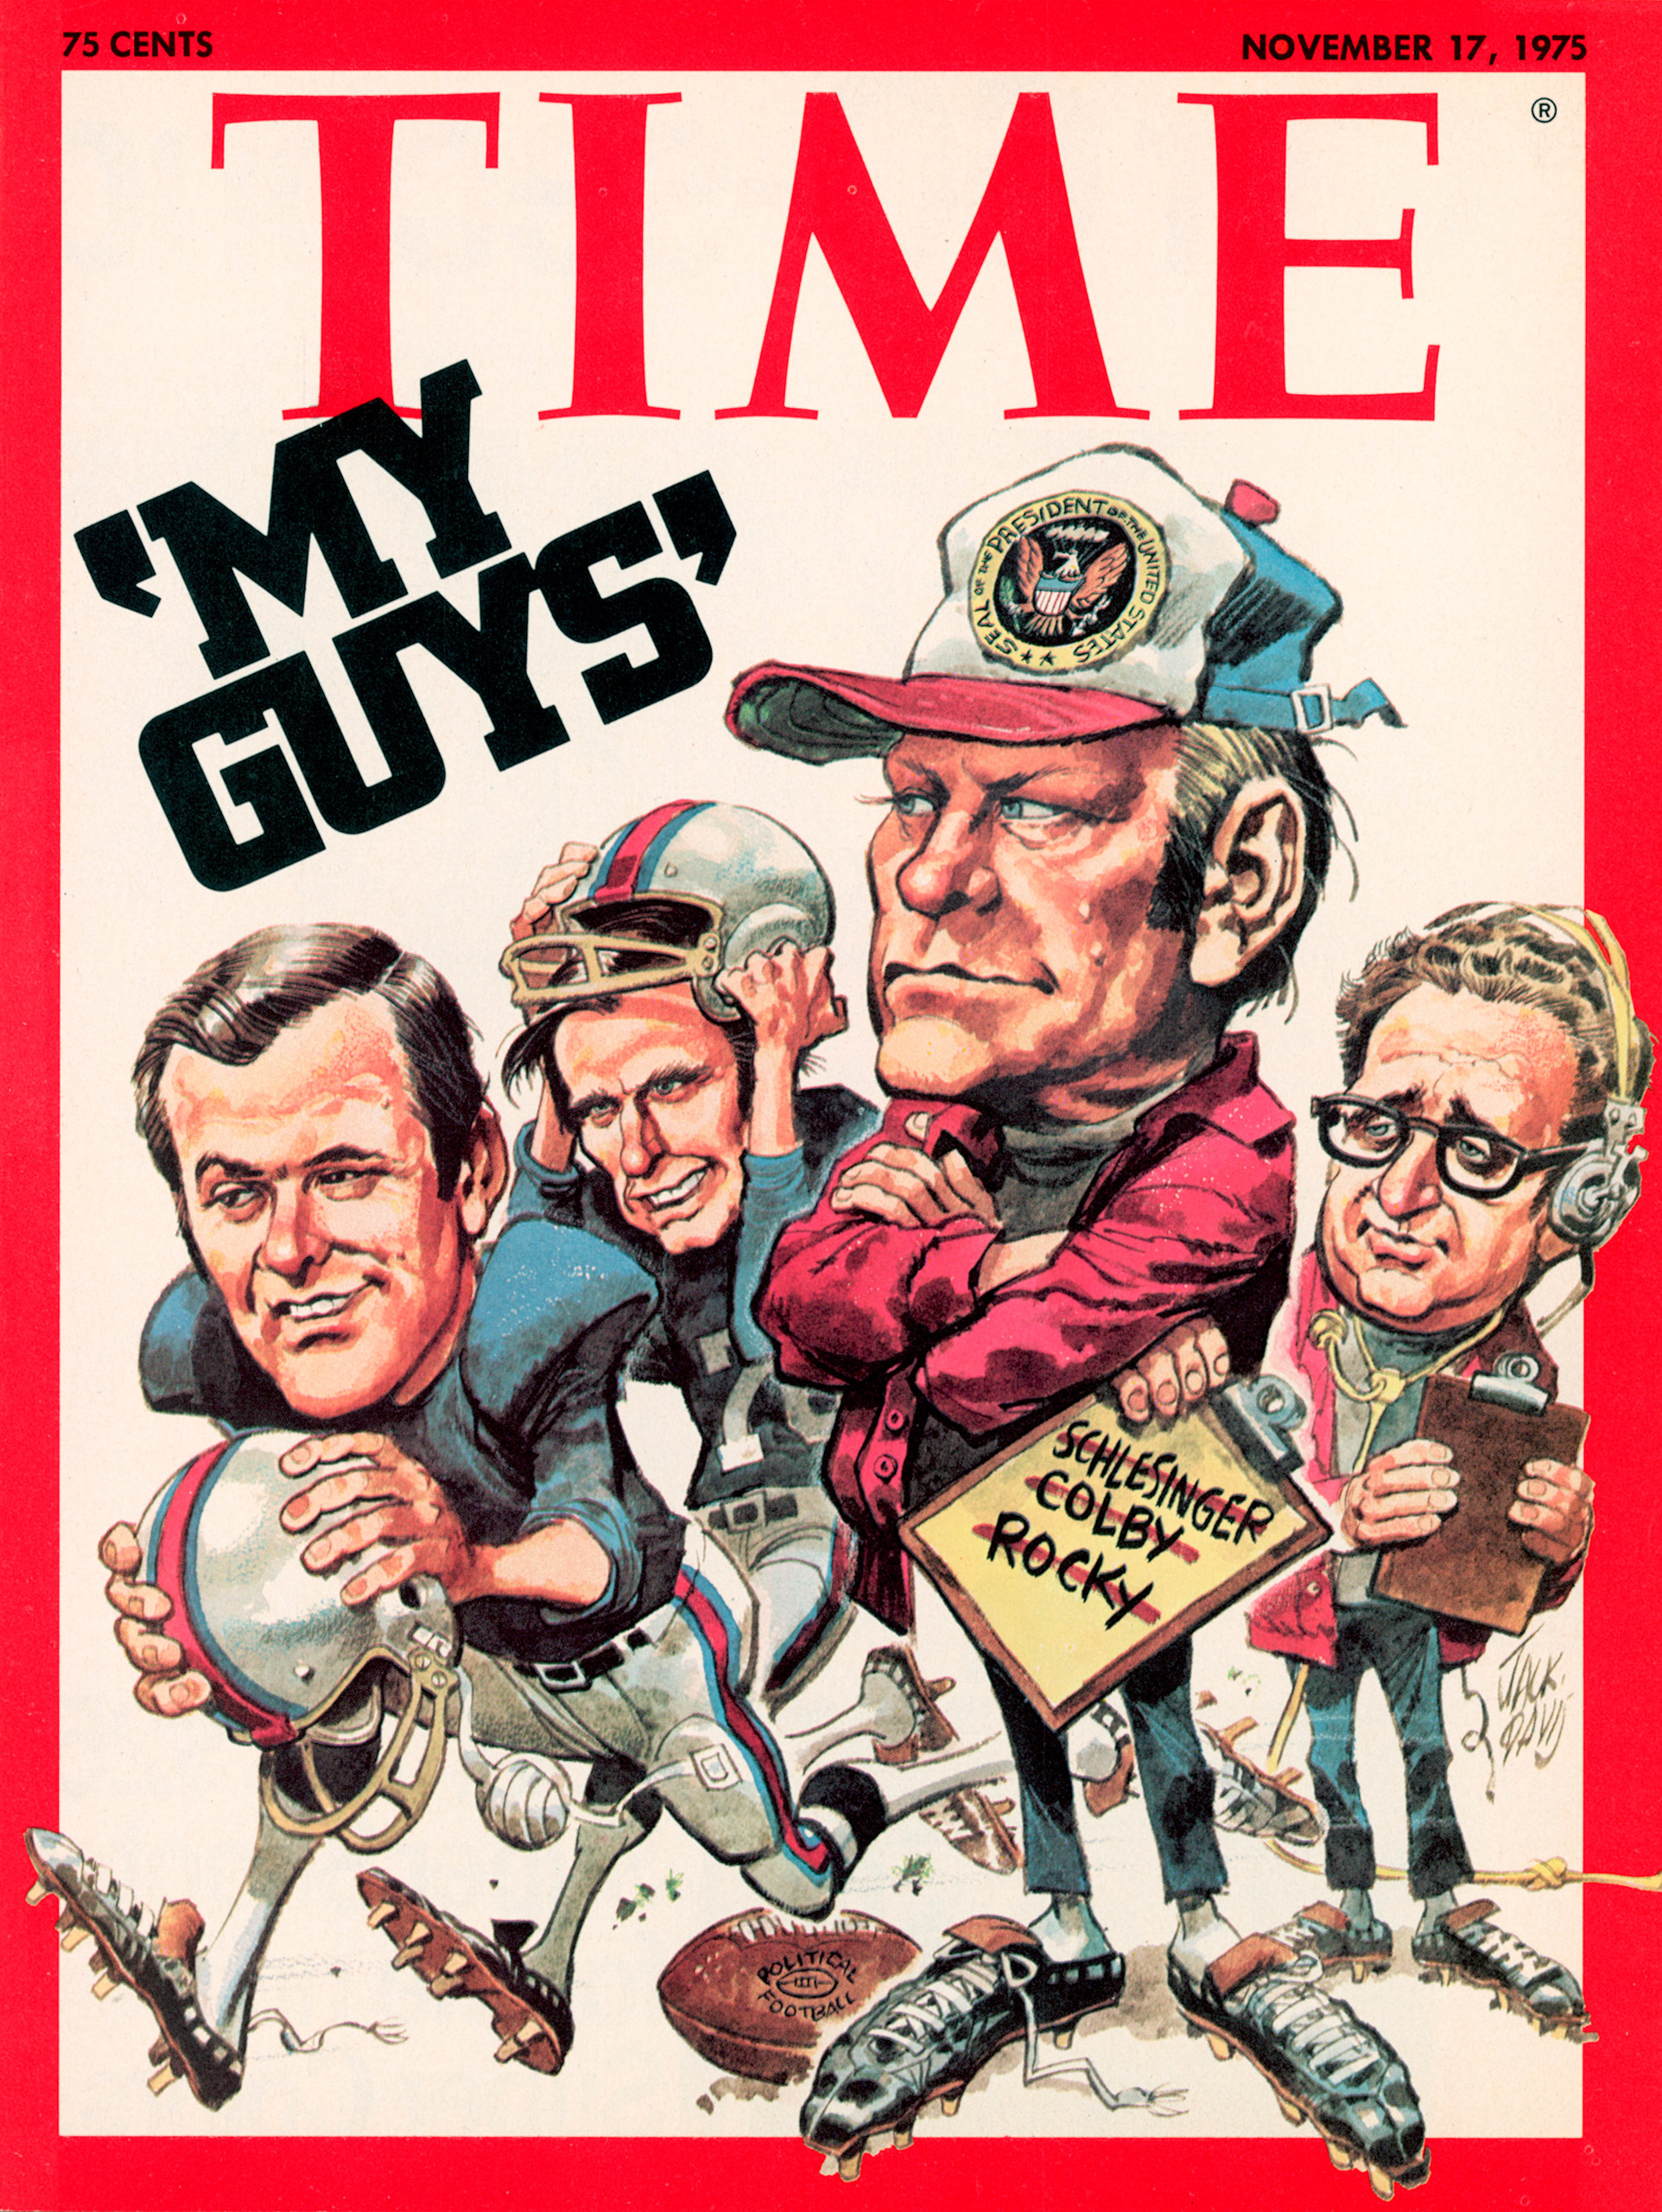 George H.W. Bush, pictured as part of Gerald Ford's team, on the Nov. 17, 1975, cover of TIME.